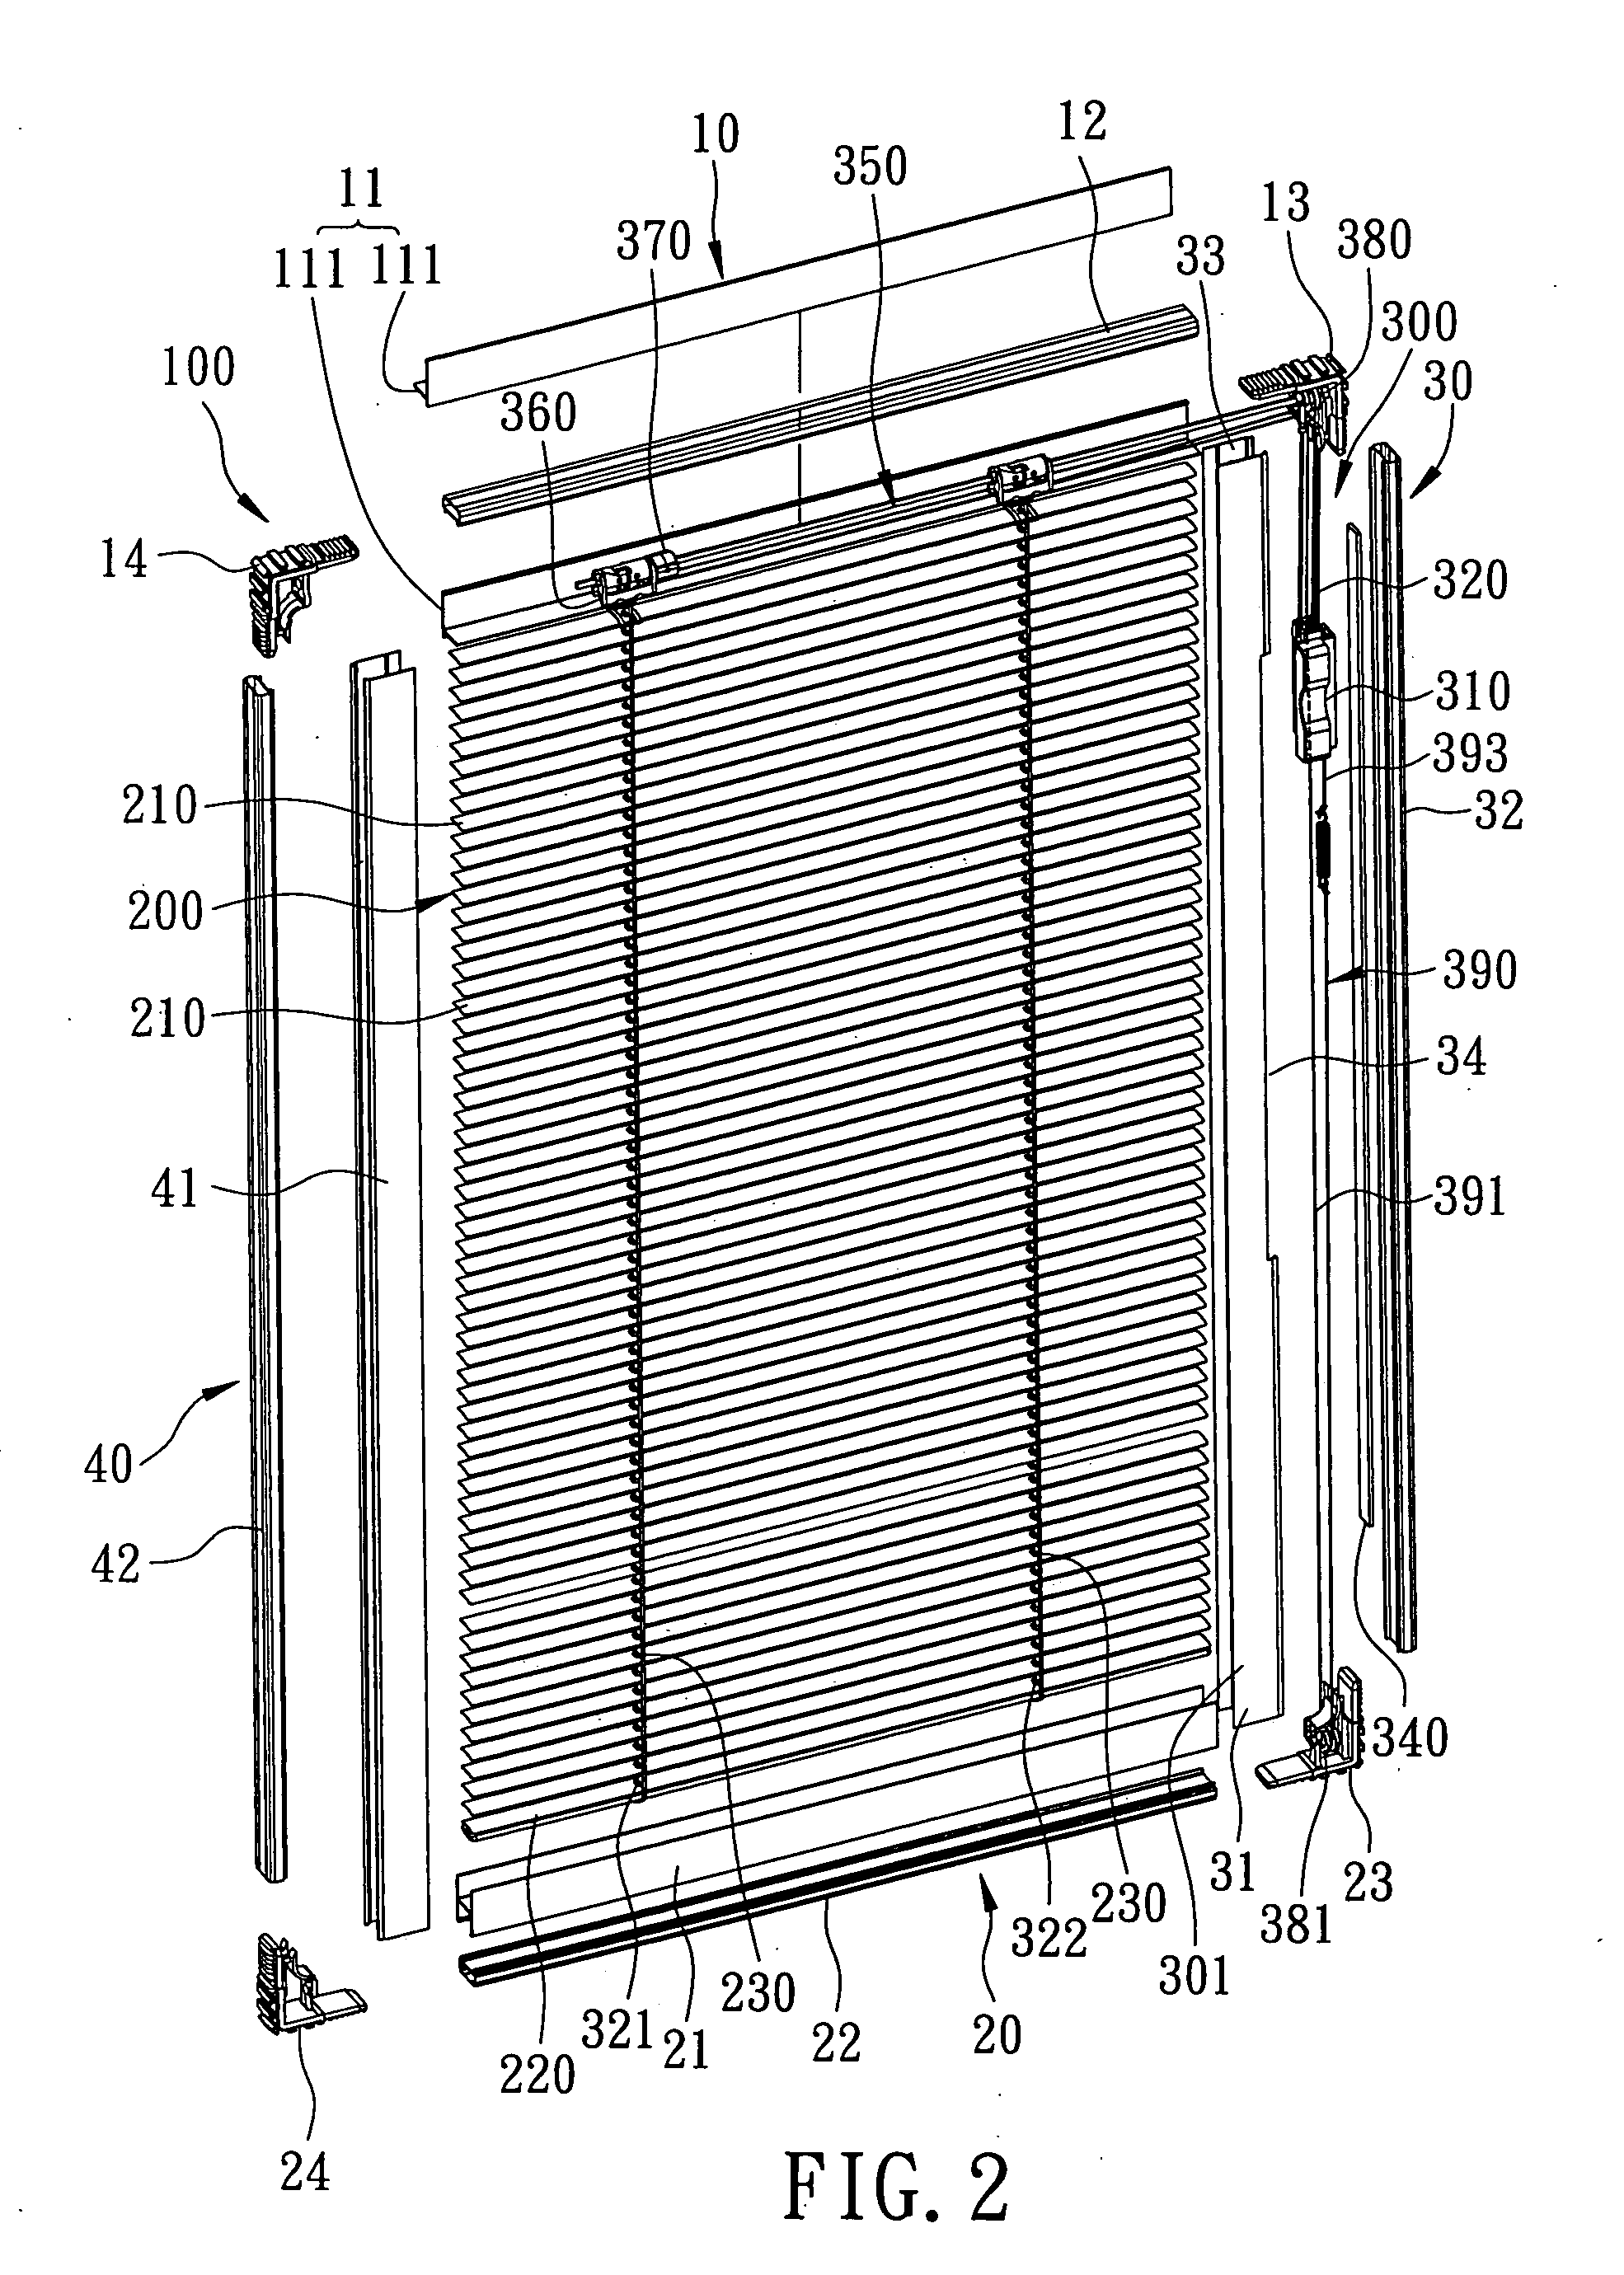 Window blind assembly having an outer frame